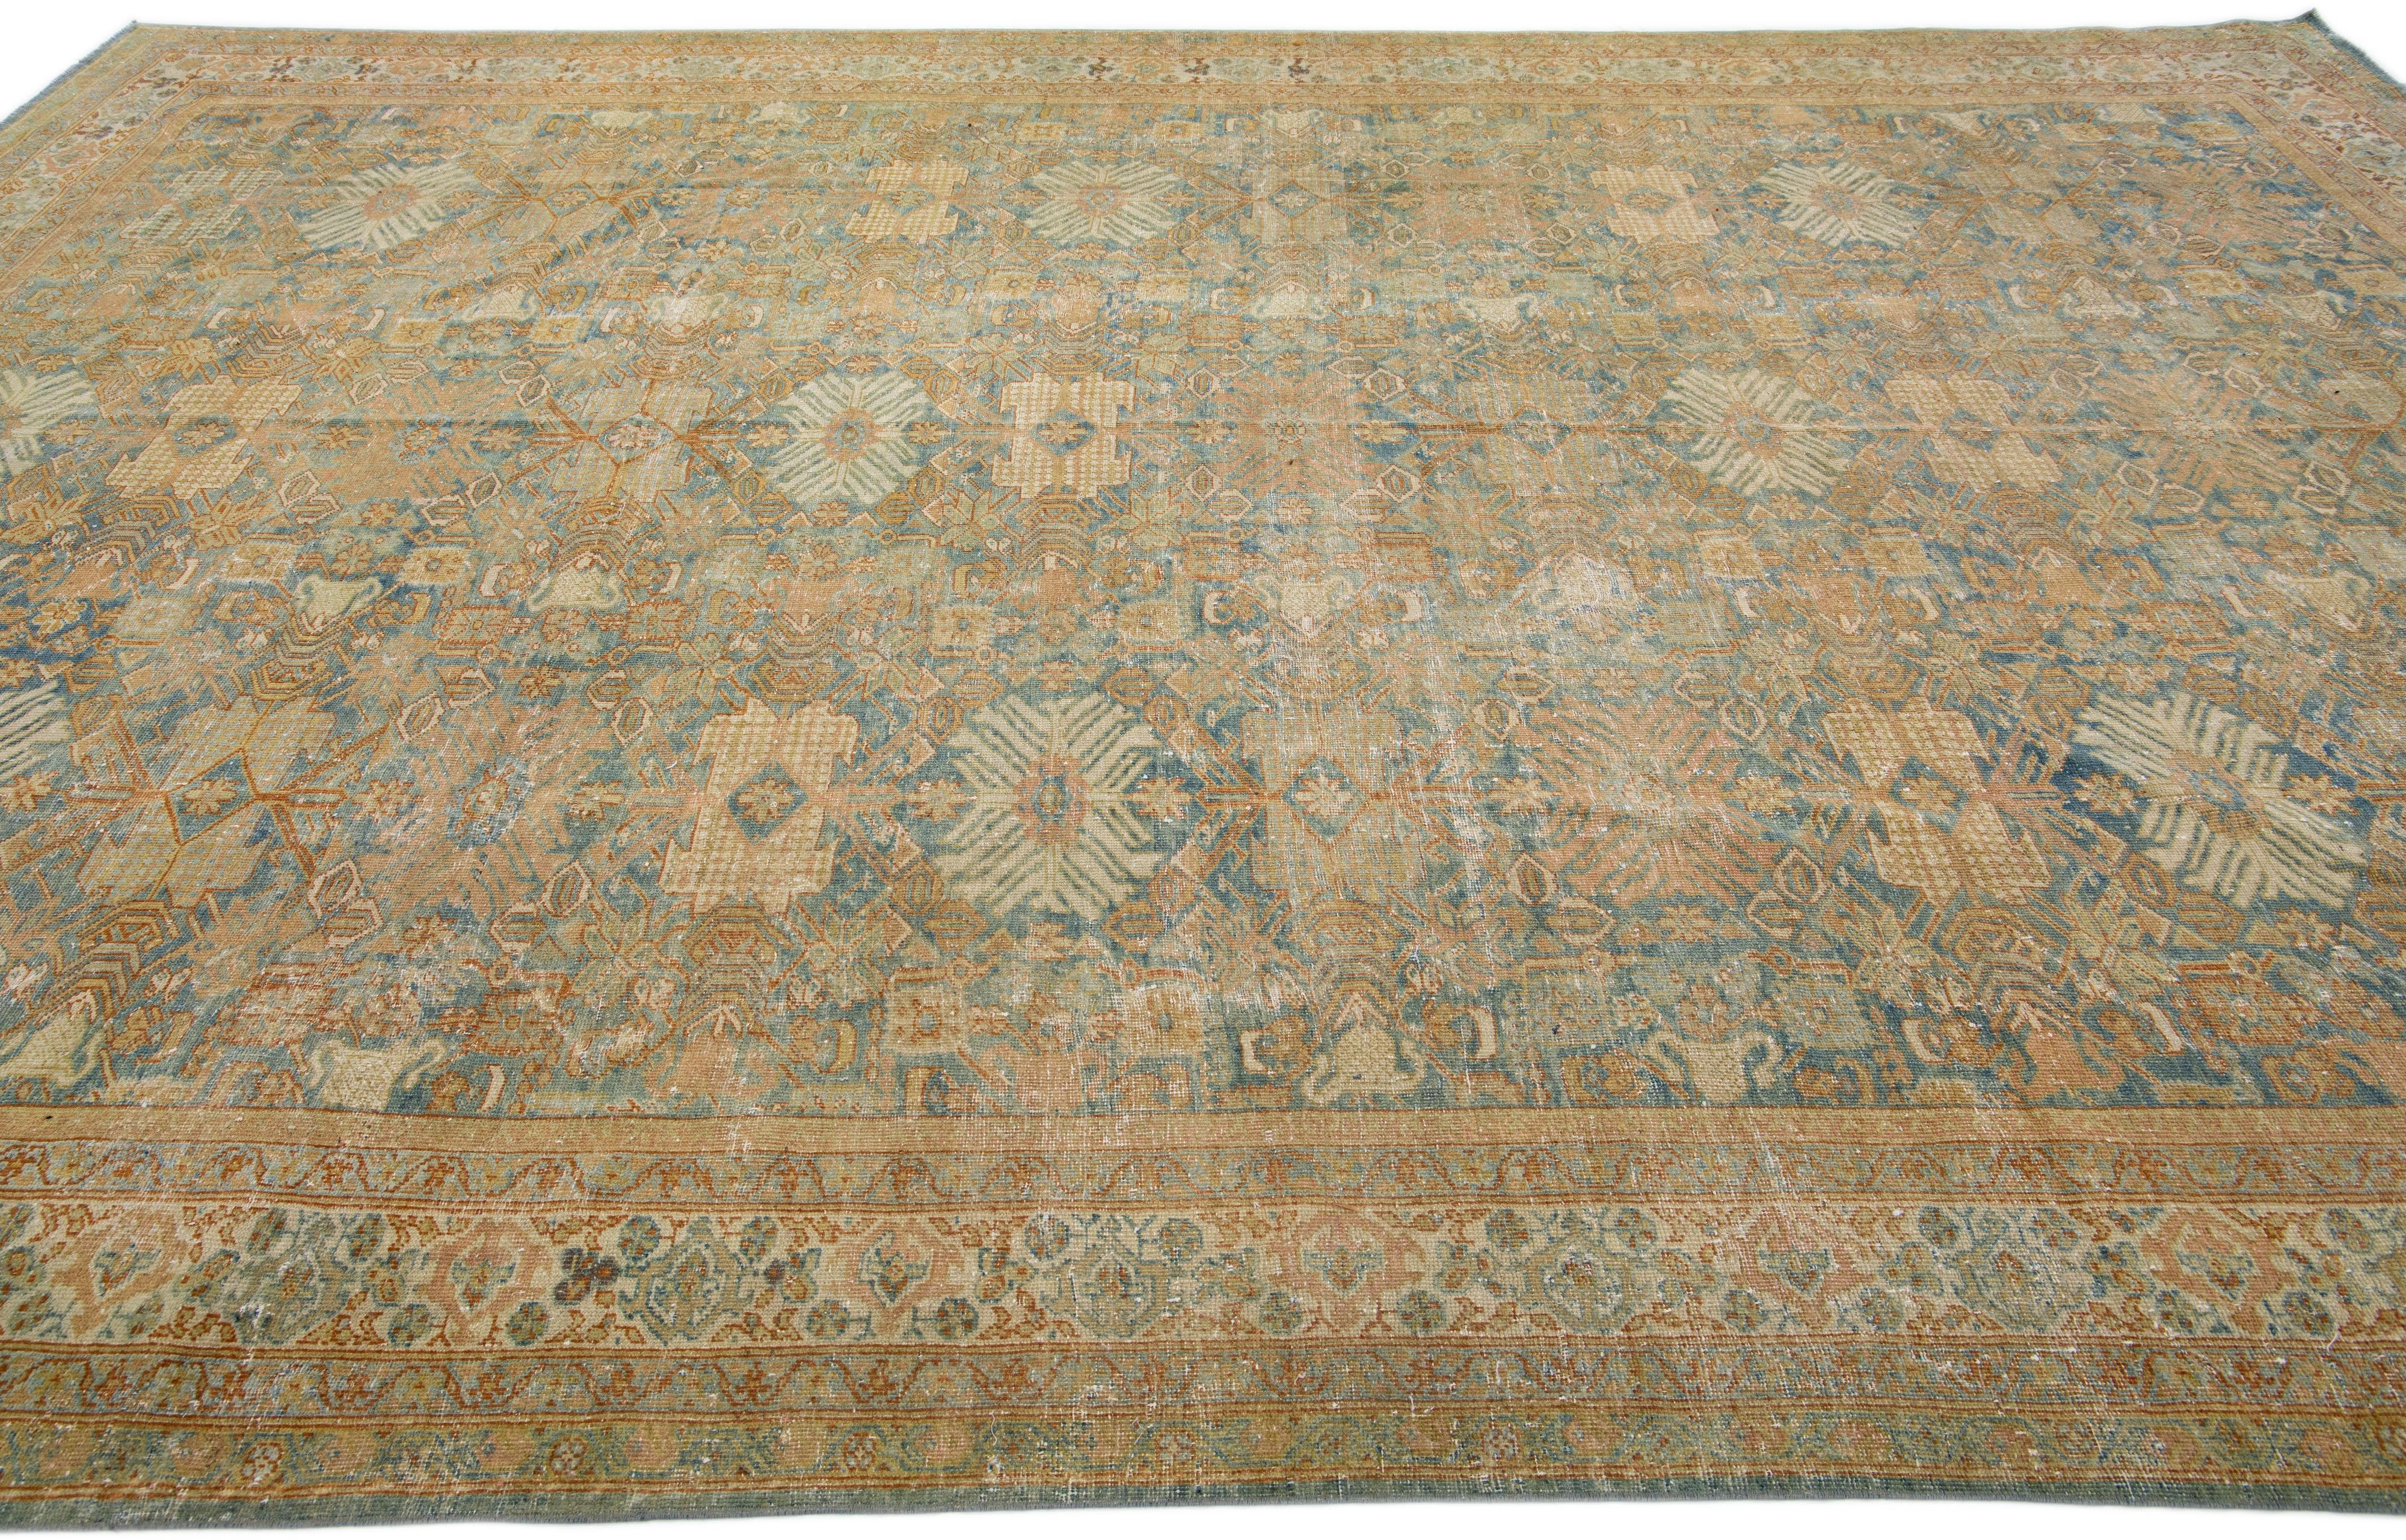 20th Century Antique Persian Mahal Orange & Blue Handmade Wool Rug with Floral Design For Sale